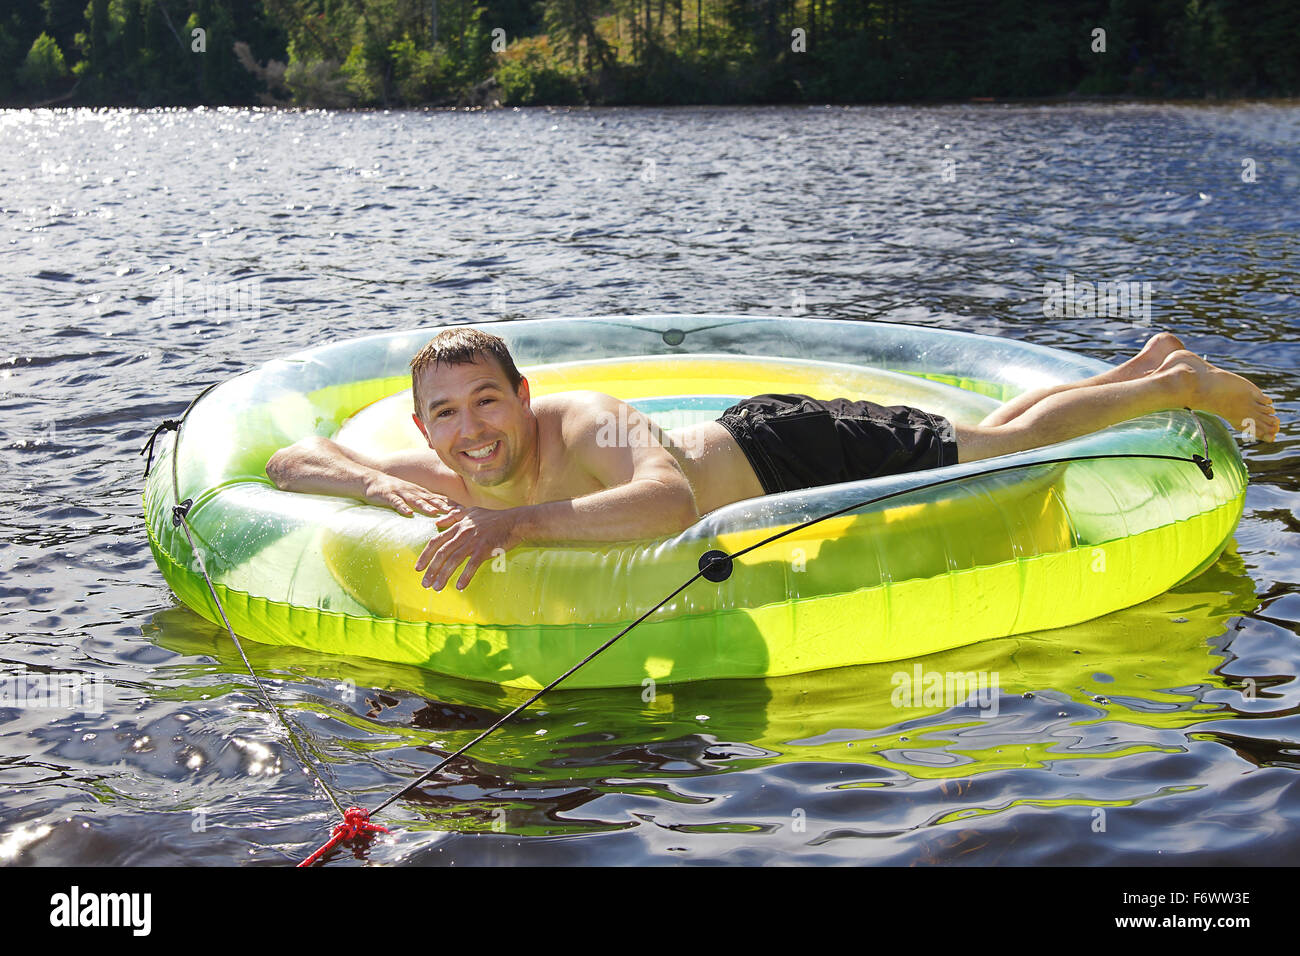 Man having fun and relaxing on large plastic buoy or swim ring at the lake Stock Photo